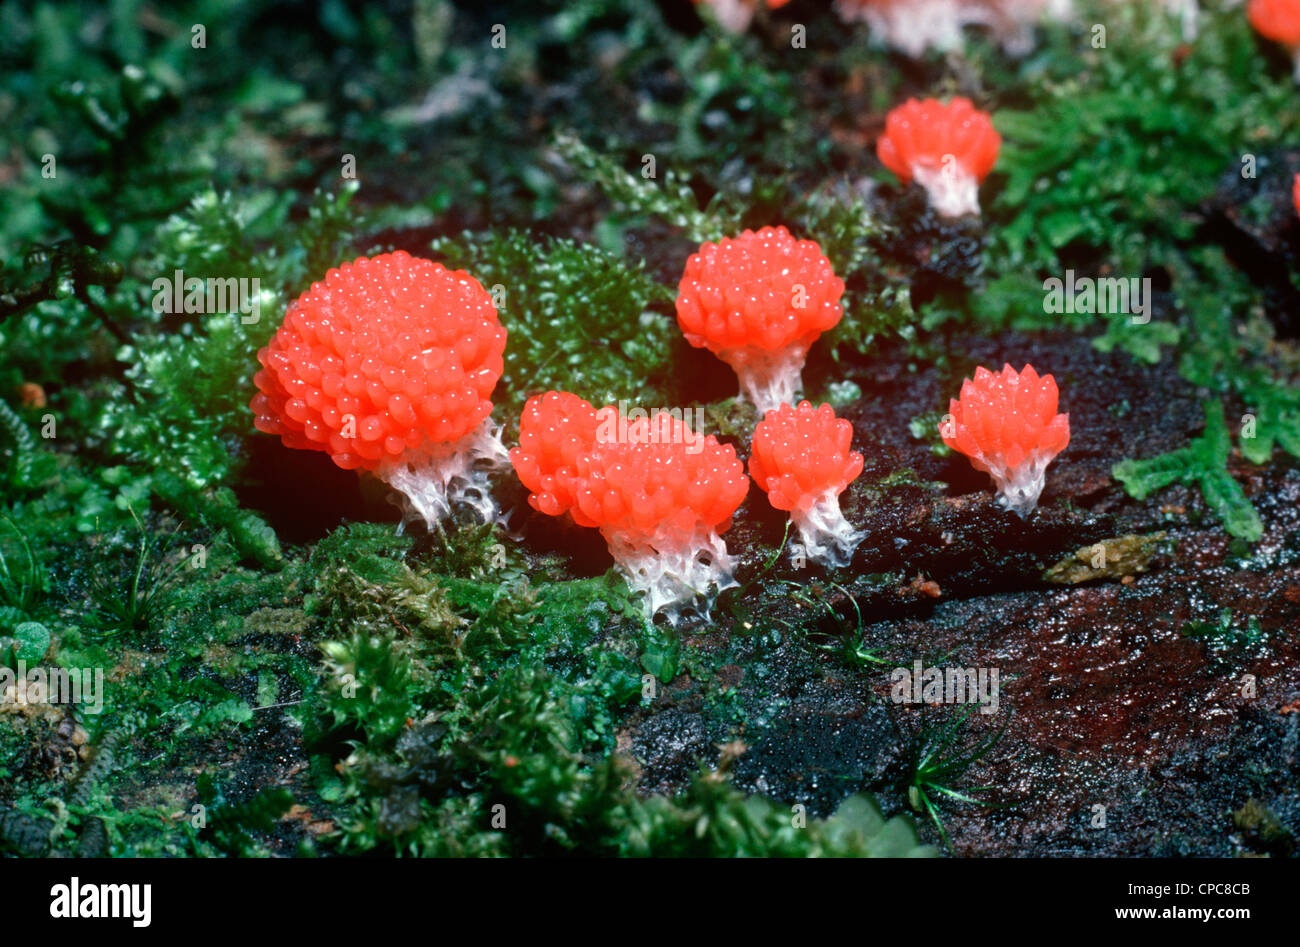 Slime mould fruiting bodies on a log in rainforest Malaysia Stock Photo